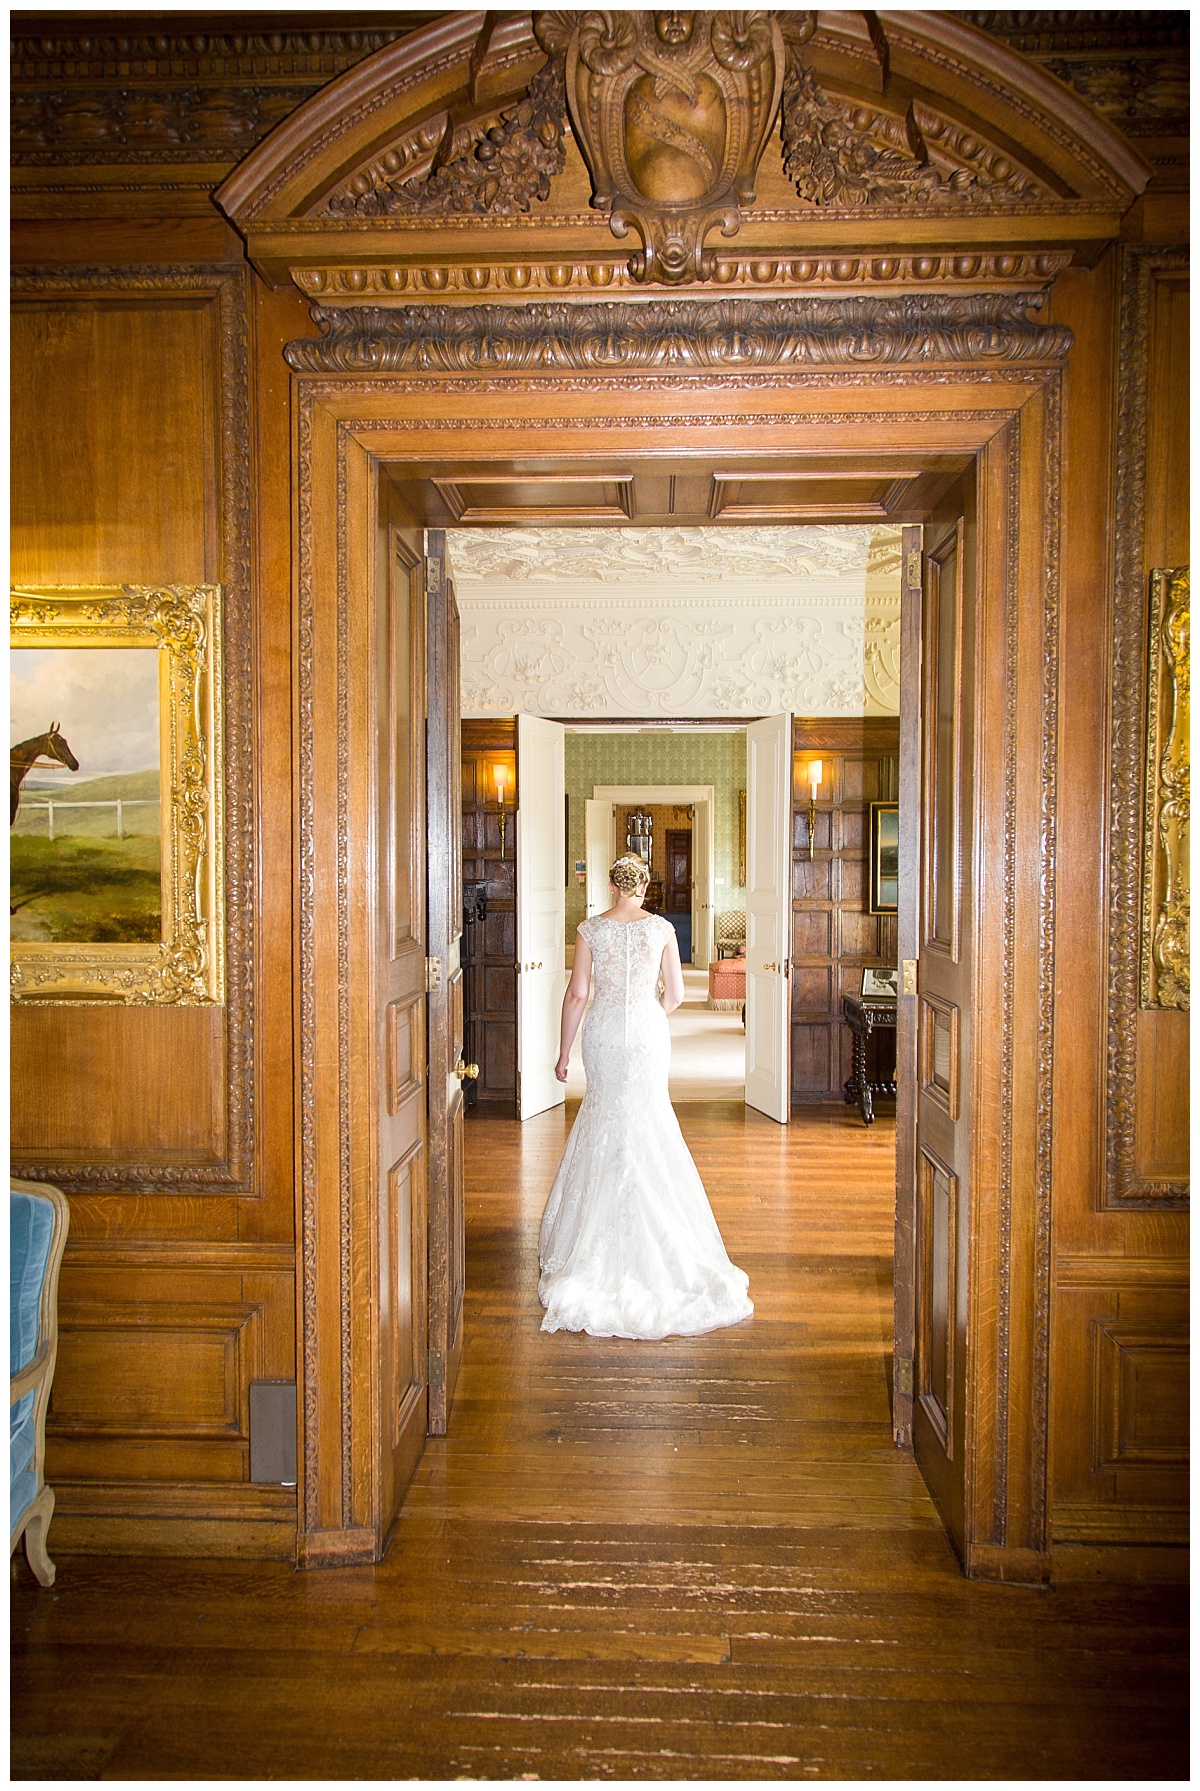 Wedding Photography Manchester - Mel and Lewis's Epic Wedding Day At Knowsley Hall 26